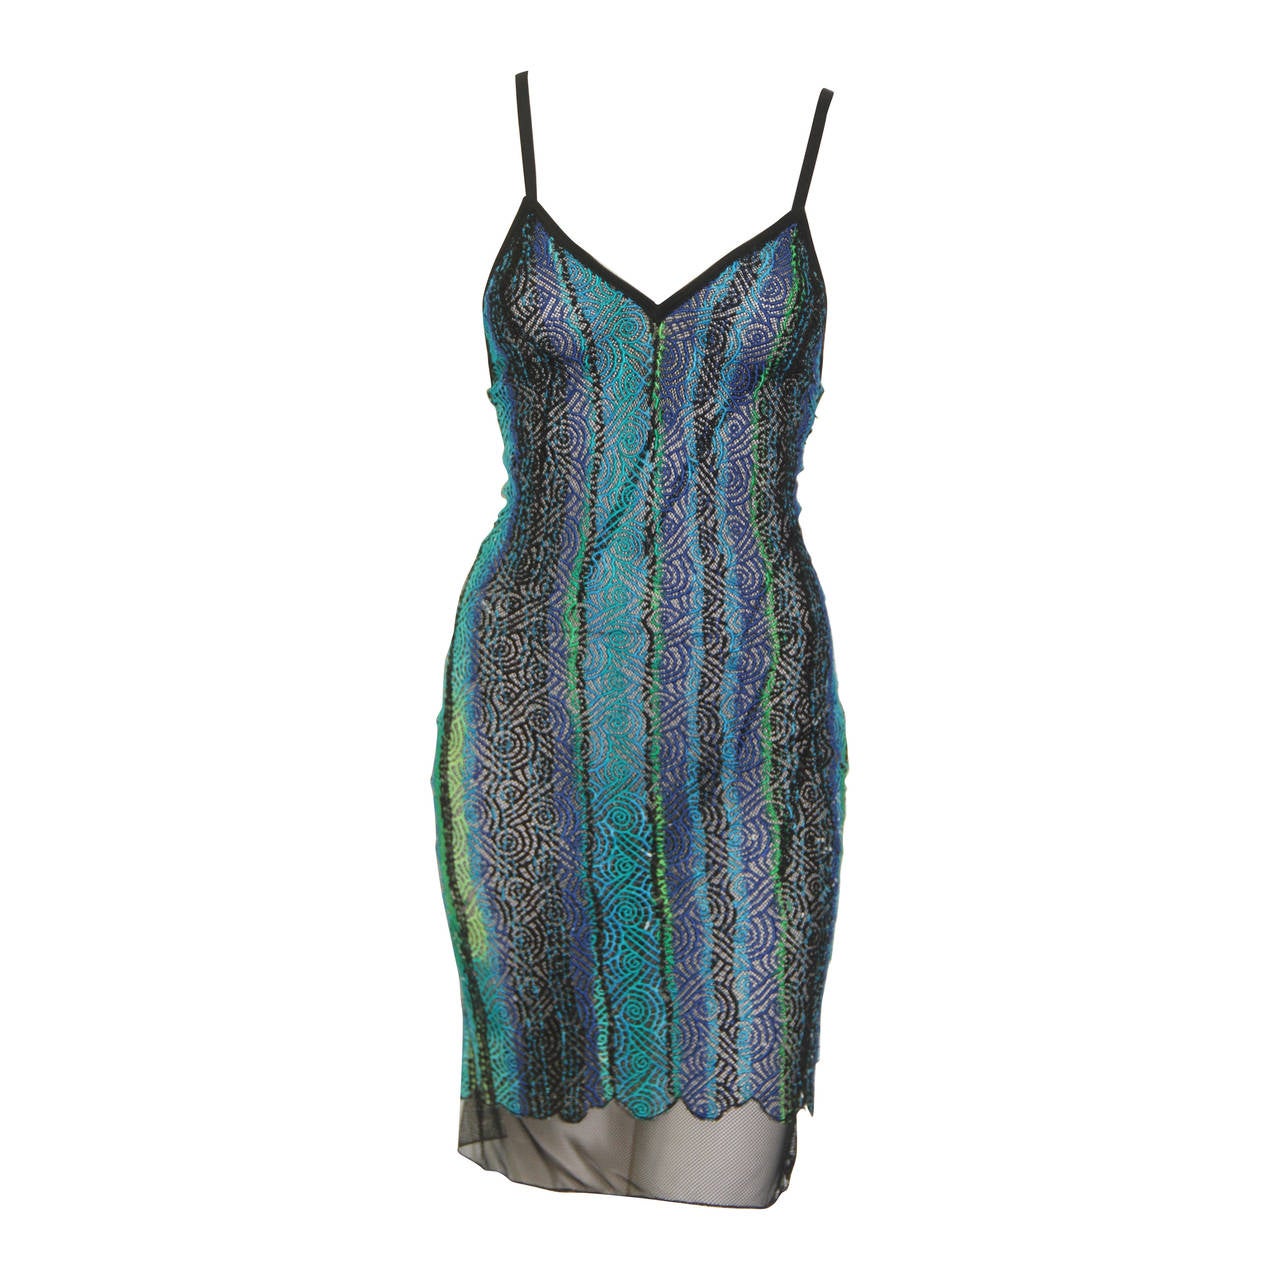 Atelier Versace Punk Multi-Coloured Threaded Dress With Net Spring 1994 For Sale